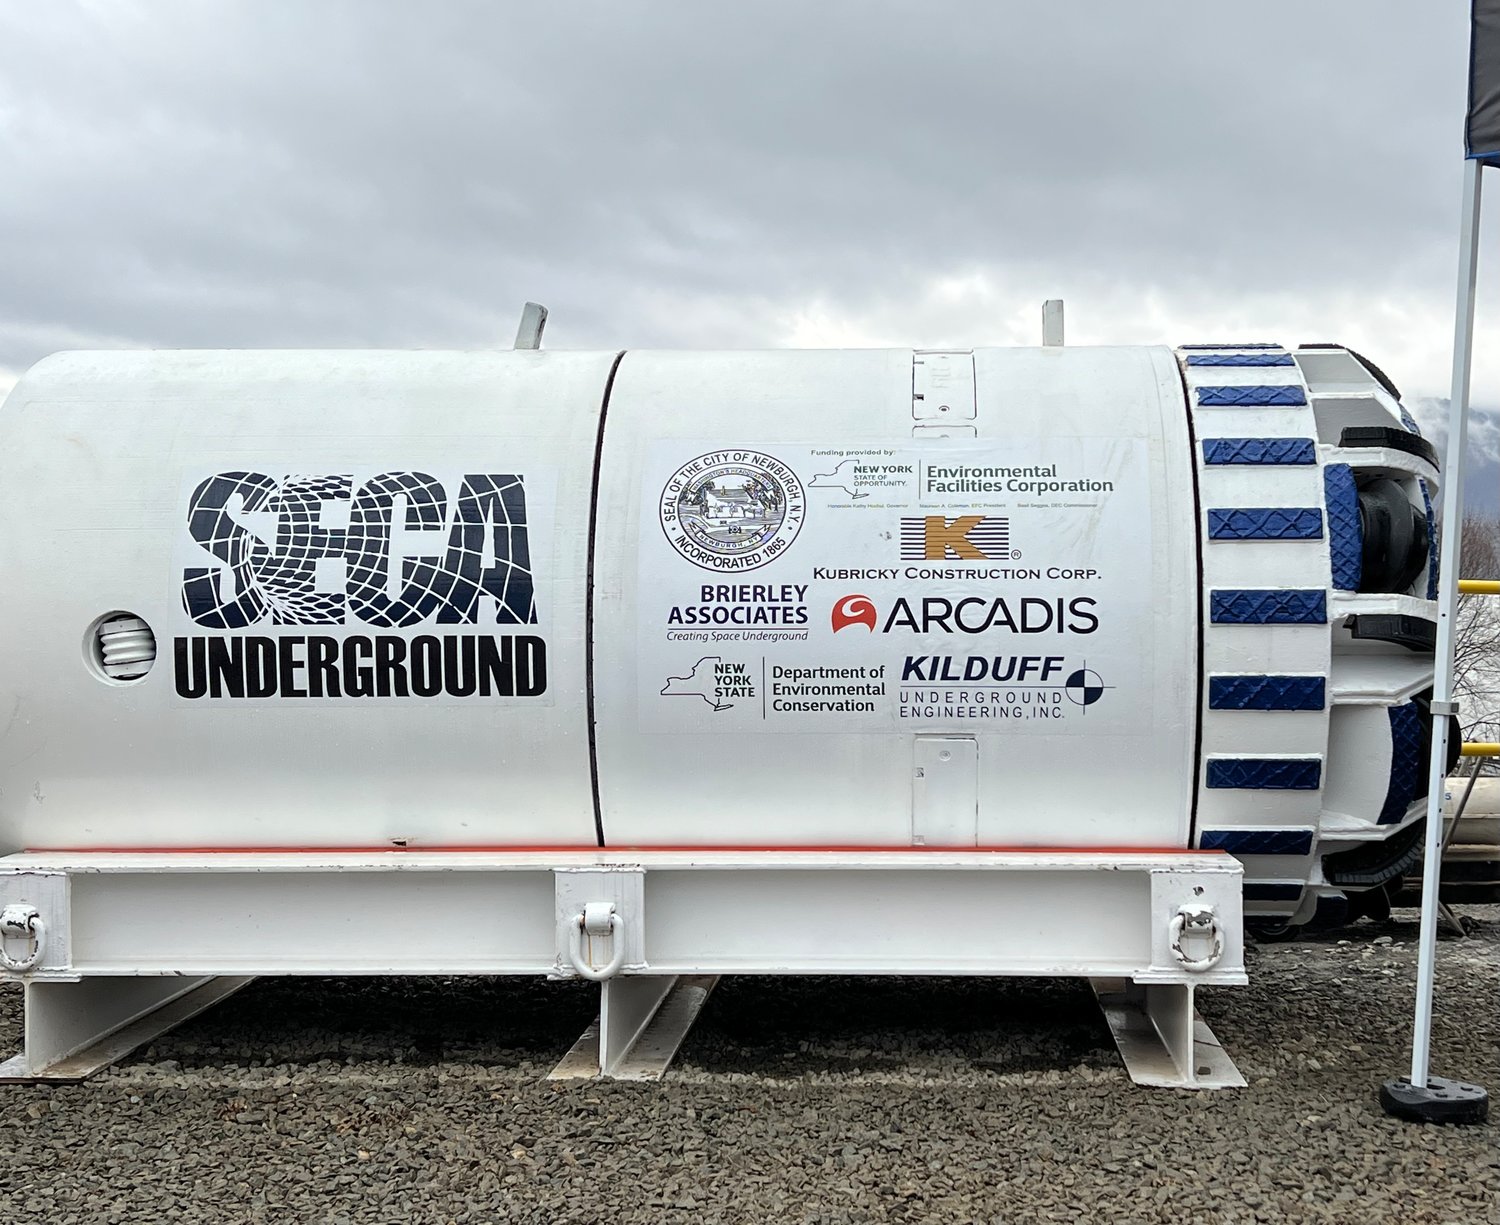 The new tunnel boring drill weighing 35,000 pounds that was fabricated and constructed in Maryland, specifically for the project at a cost of $1.5 million.